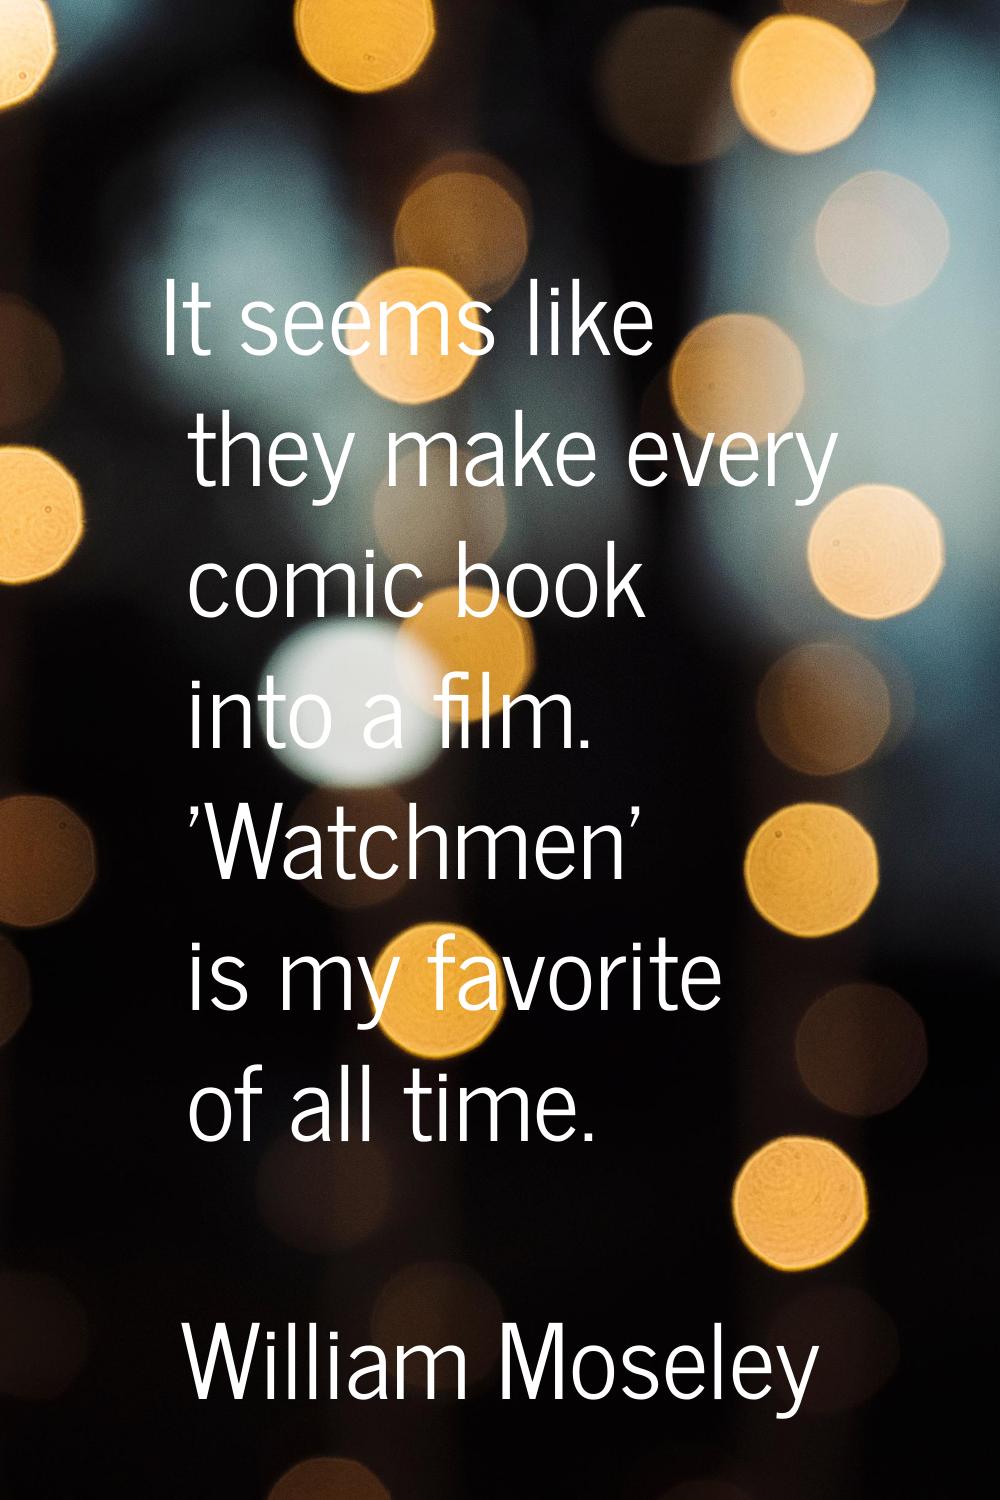 It seems like they make every comic book into a film. 'Watchmen' is my favorite of all time.